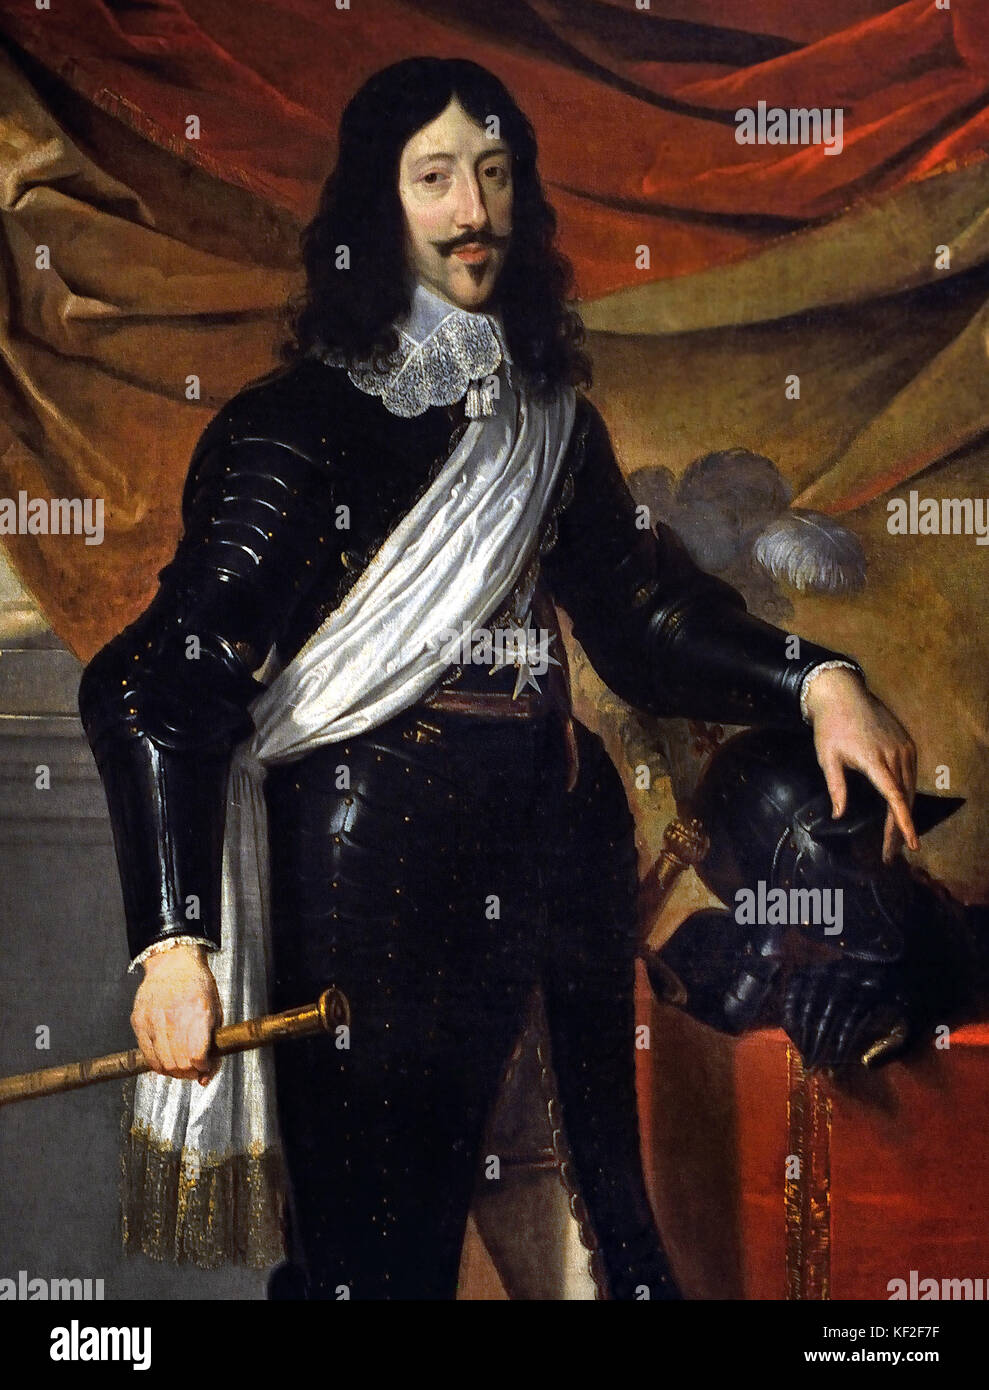 Portrait Louis XIII Roi de France ( Louis XIII  1601 –1643 was a monarch of the House of Bourbon who ruled as King of France from 1610 to 1643 and, (as Louis II) from 1610 to 1620, when the crown of Navarre was merged with the French crown. )  1632  Peter Paul Rubens (1577–1640) Painter in the Flemish Baroque tradition .Antwerp, Antwerpen, Belgium, Stock Photo